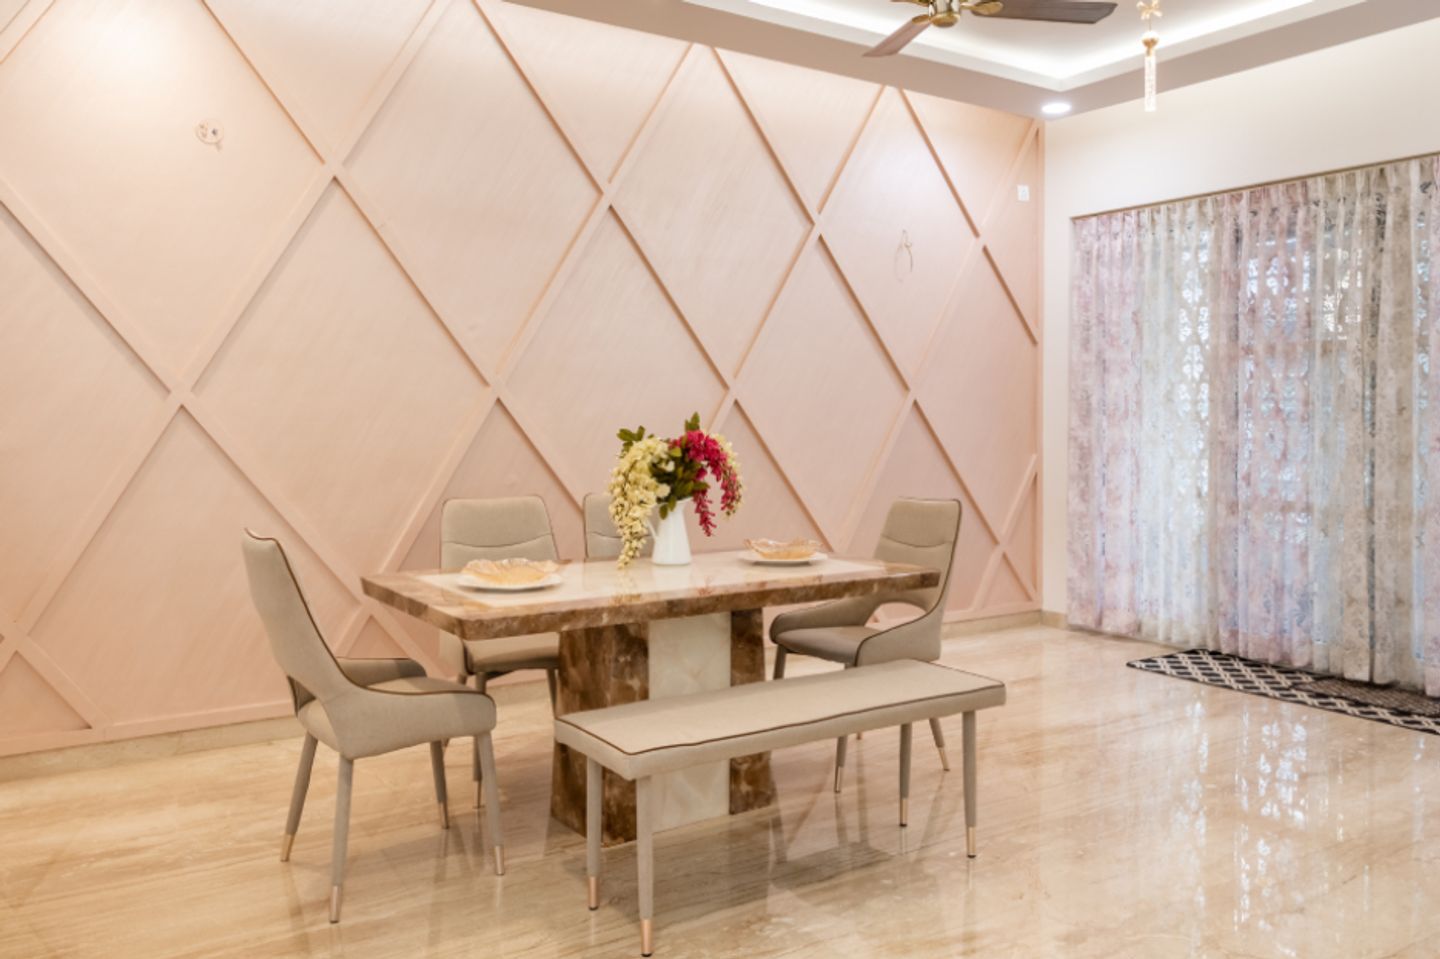 Contemporary Dining Room Design With Geometric Accent Wall